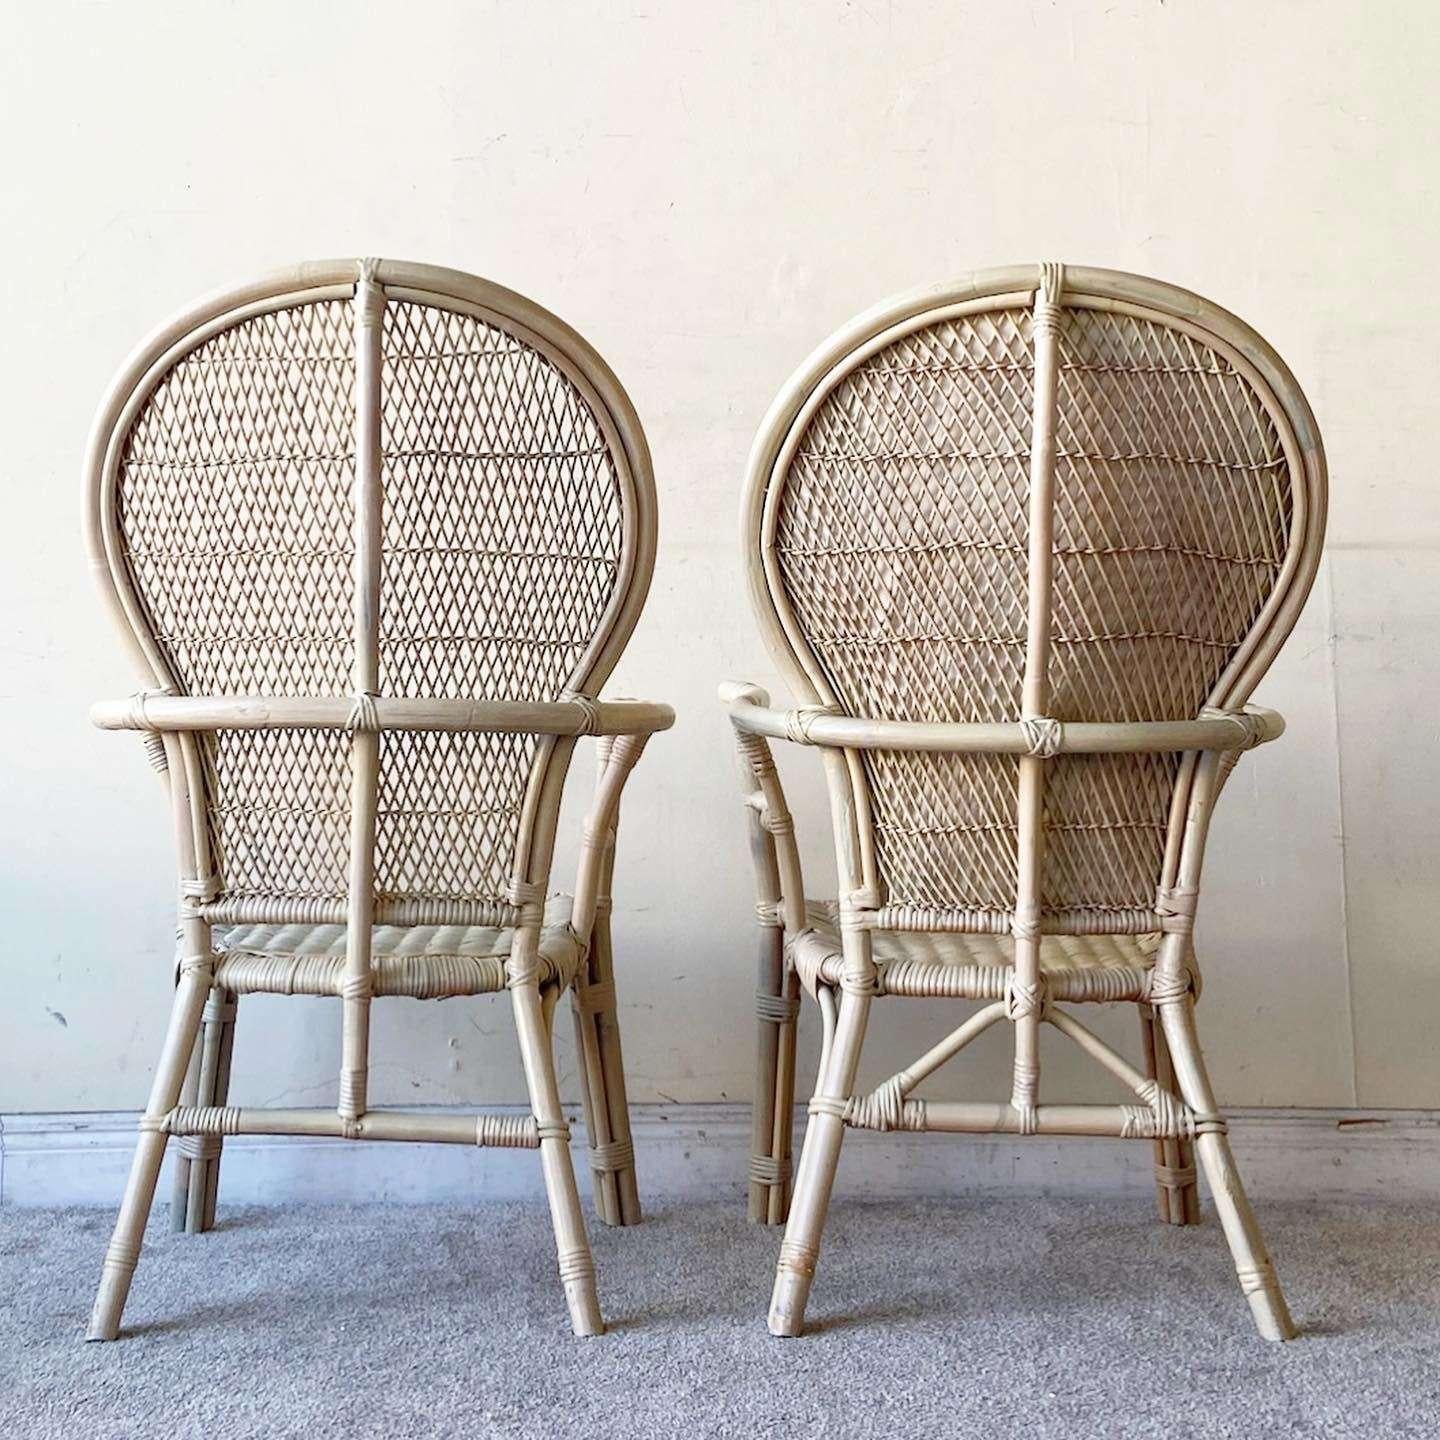 Boho Chic Balloon Back Bamboo Rattan Dining Chairs - Set of 6 In Good Condition For Sale In Delray Beach, FL